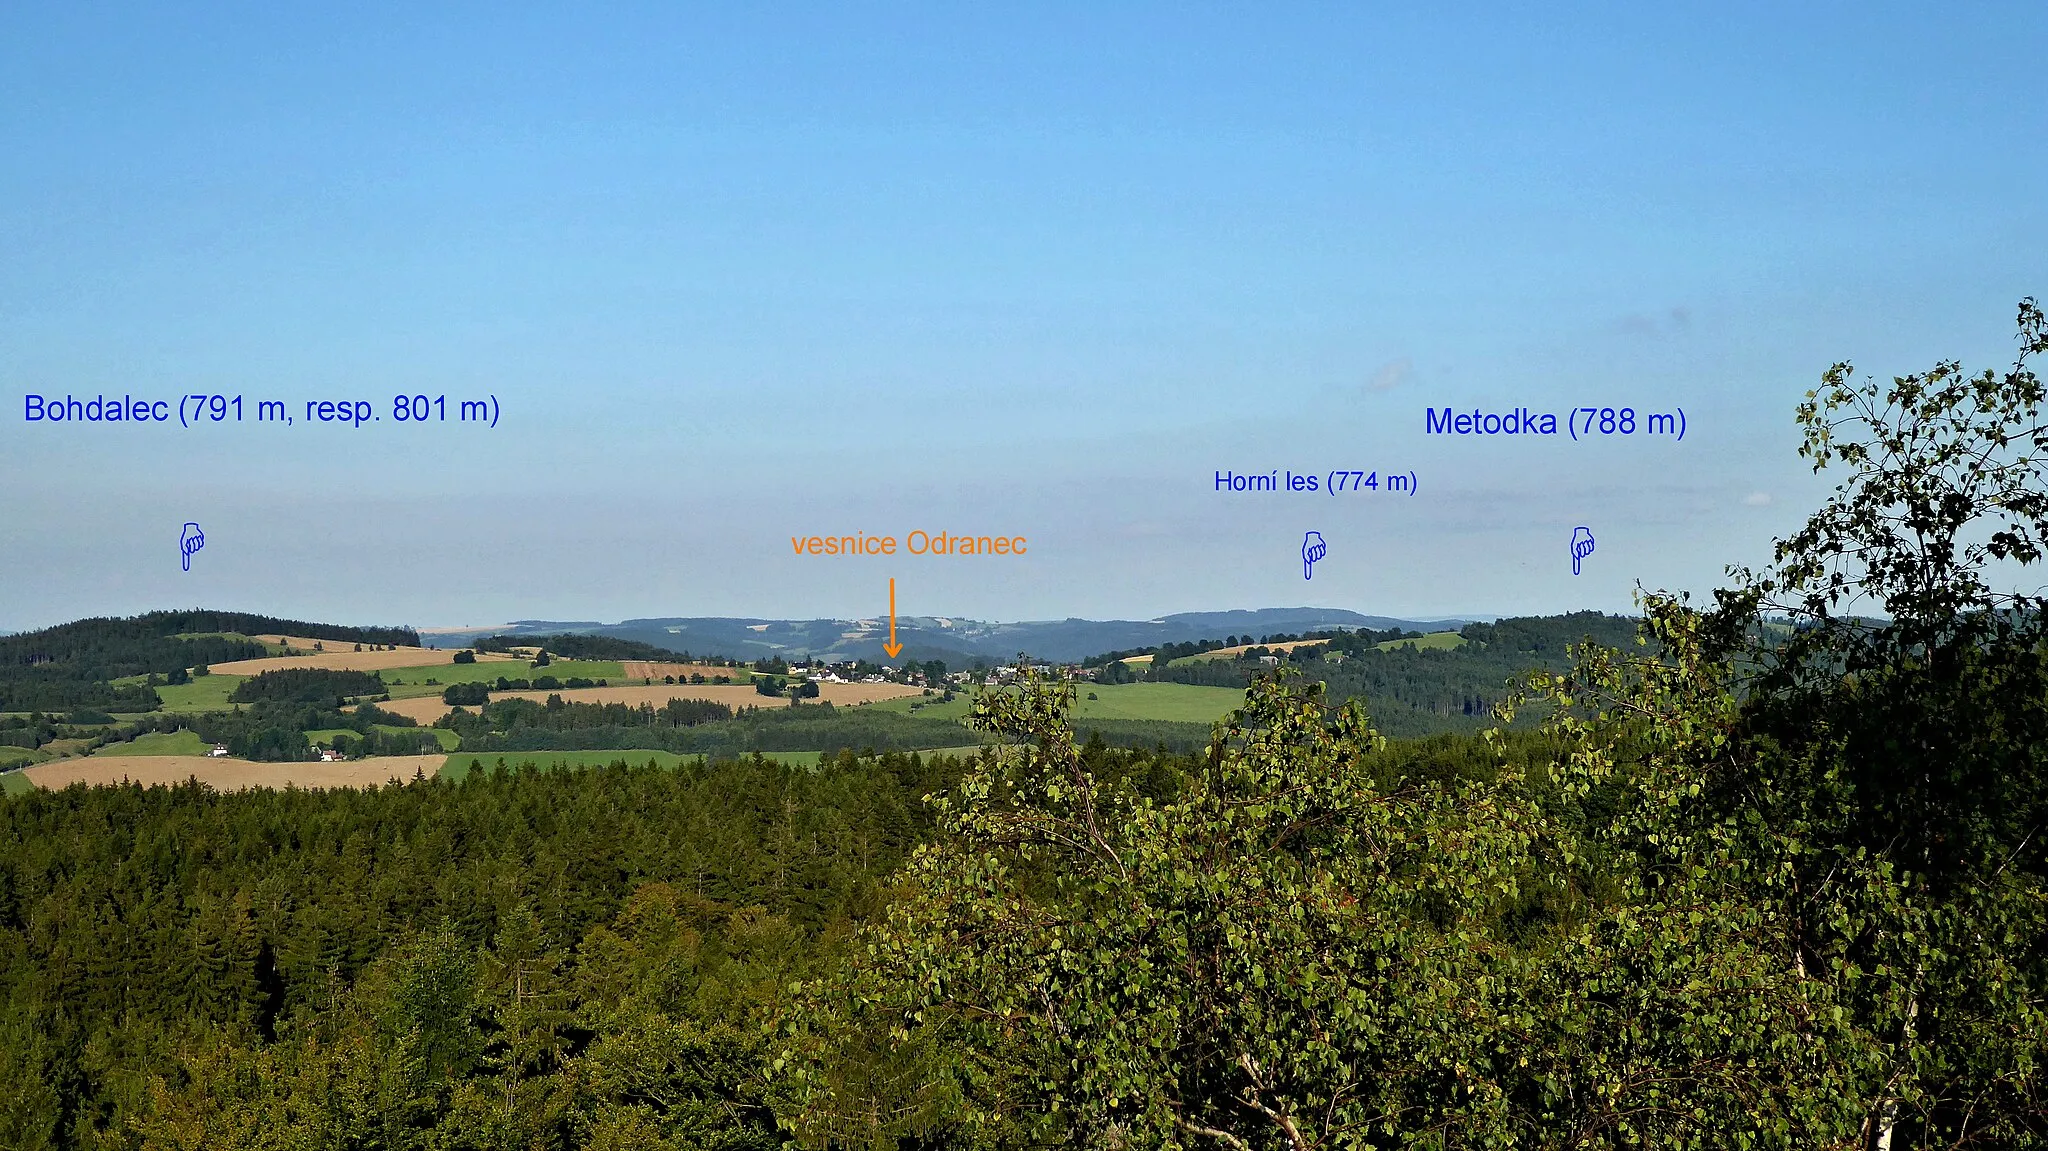 Photo showing: "Pasecká" Rock (819 m asl) is a rock formation in the geomorphological district "Pohledeckoskalská" Highlands and natural monument in the "Žďár" Hills Protected Landscape Area. The top part consists of three rock blocks with the czech names "Vyhlídka, Omšelý hřeben, Pernštejn". Adjusted output to a rock block called Viewpoint (czech name: Vyhlídka). The ending of the blue tourist route of the Czech Tourists Club, section: "Medlovský" pond – "Pasecká" Rock. A view from the rock block Viewpoint to the east: the hills with the names Bohdalec and Metodka, among them the settlement Odranec. On the horizon a ridge with the peak called Upper Forest (774 m asl), the highest peak in the geomorphological units "Sulkovecká" Highlands (district) and also in the "Nedvědická" Highlands (part of geomorphological whole "Hornosvratecká" Highlands). Photo-location: Czechia, "Vysočina" Region, small hamlet "Studnice", part of town "Nové Město na Moravě, "Pohledeckoskalská" Highlands, view from the rock of Viewpoint, "Pasecká" Rock (90°).